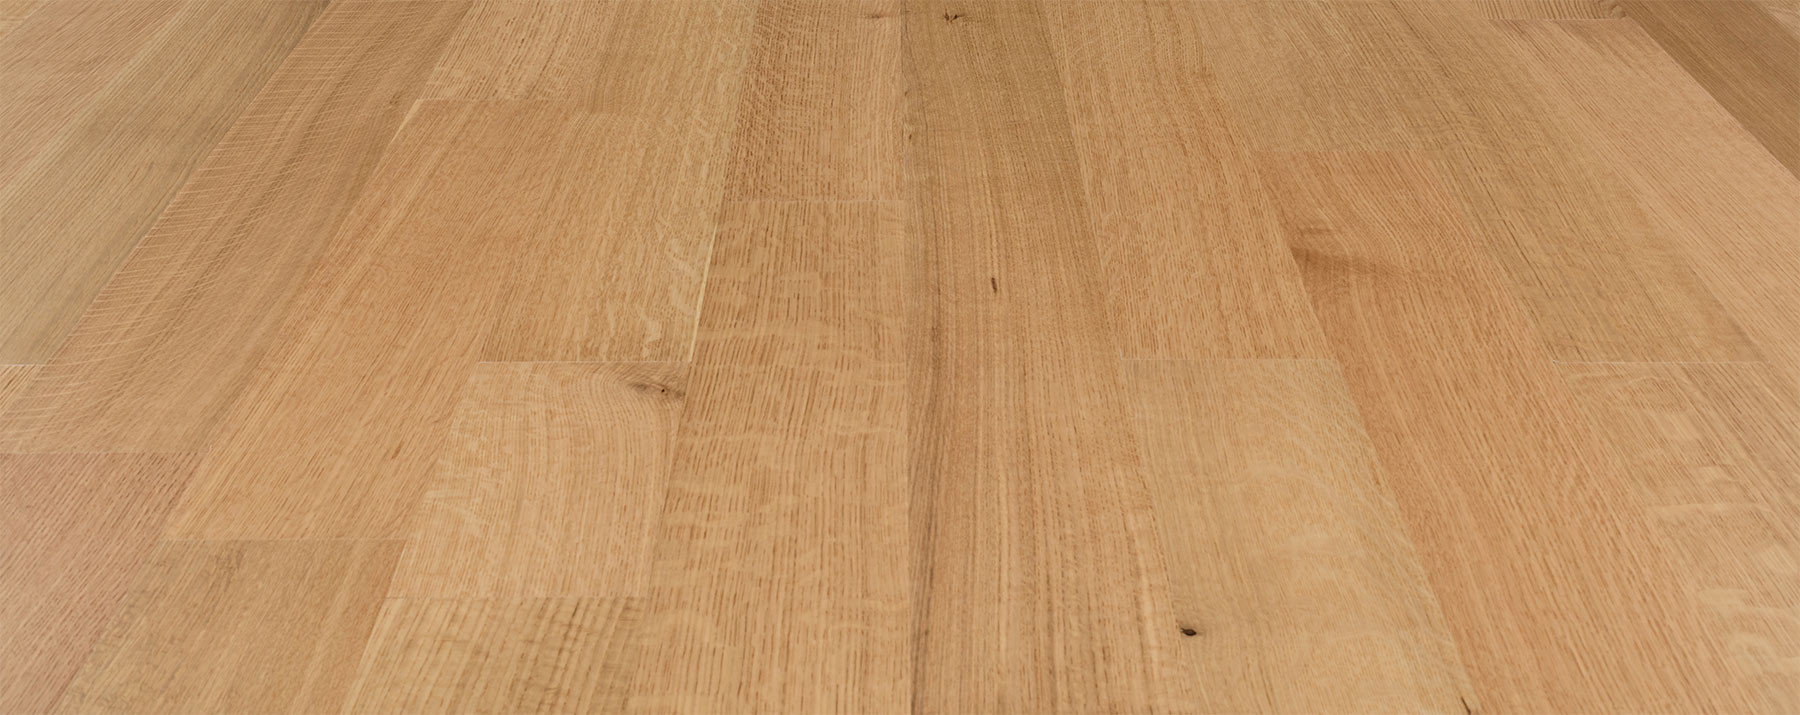 bamboo hardwood flooring canada of american quartered white oak 5″ etx surfaces for etx surfaces american quartered white oak wood flooring